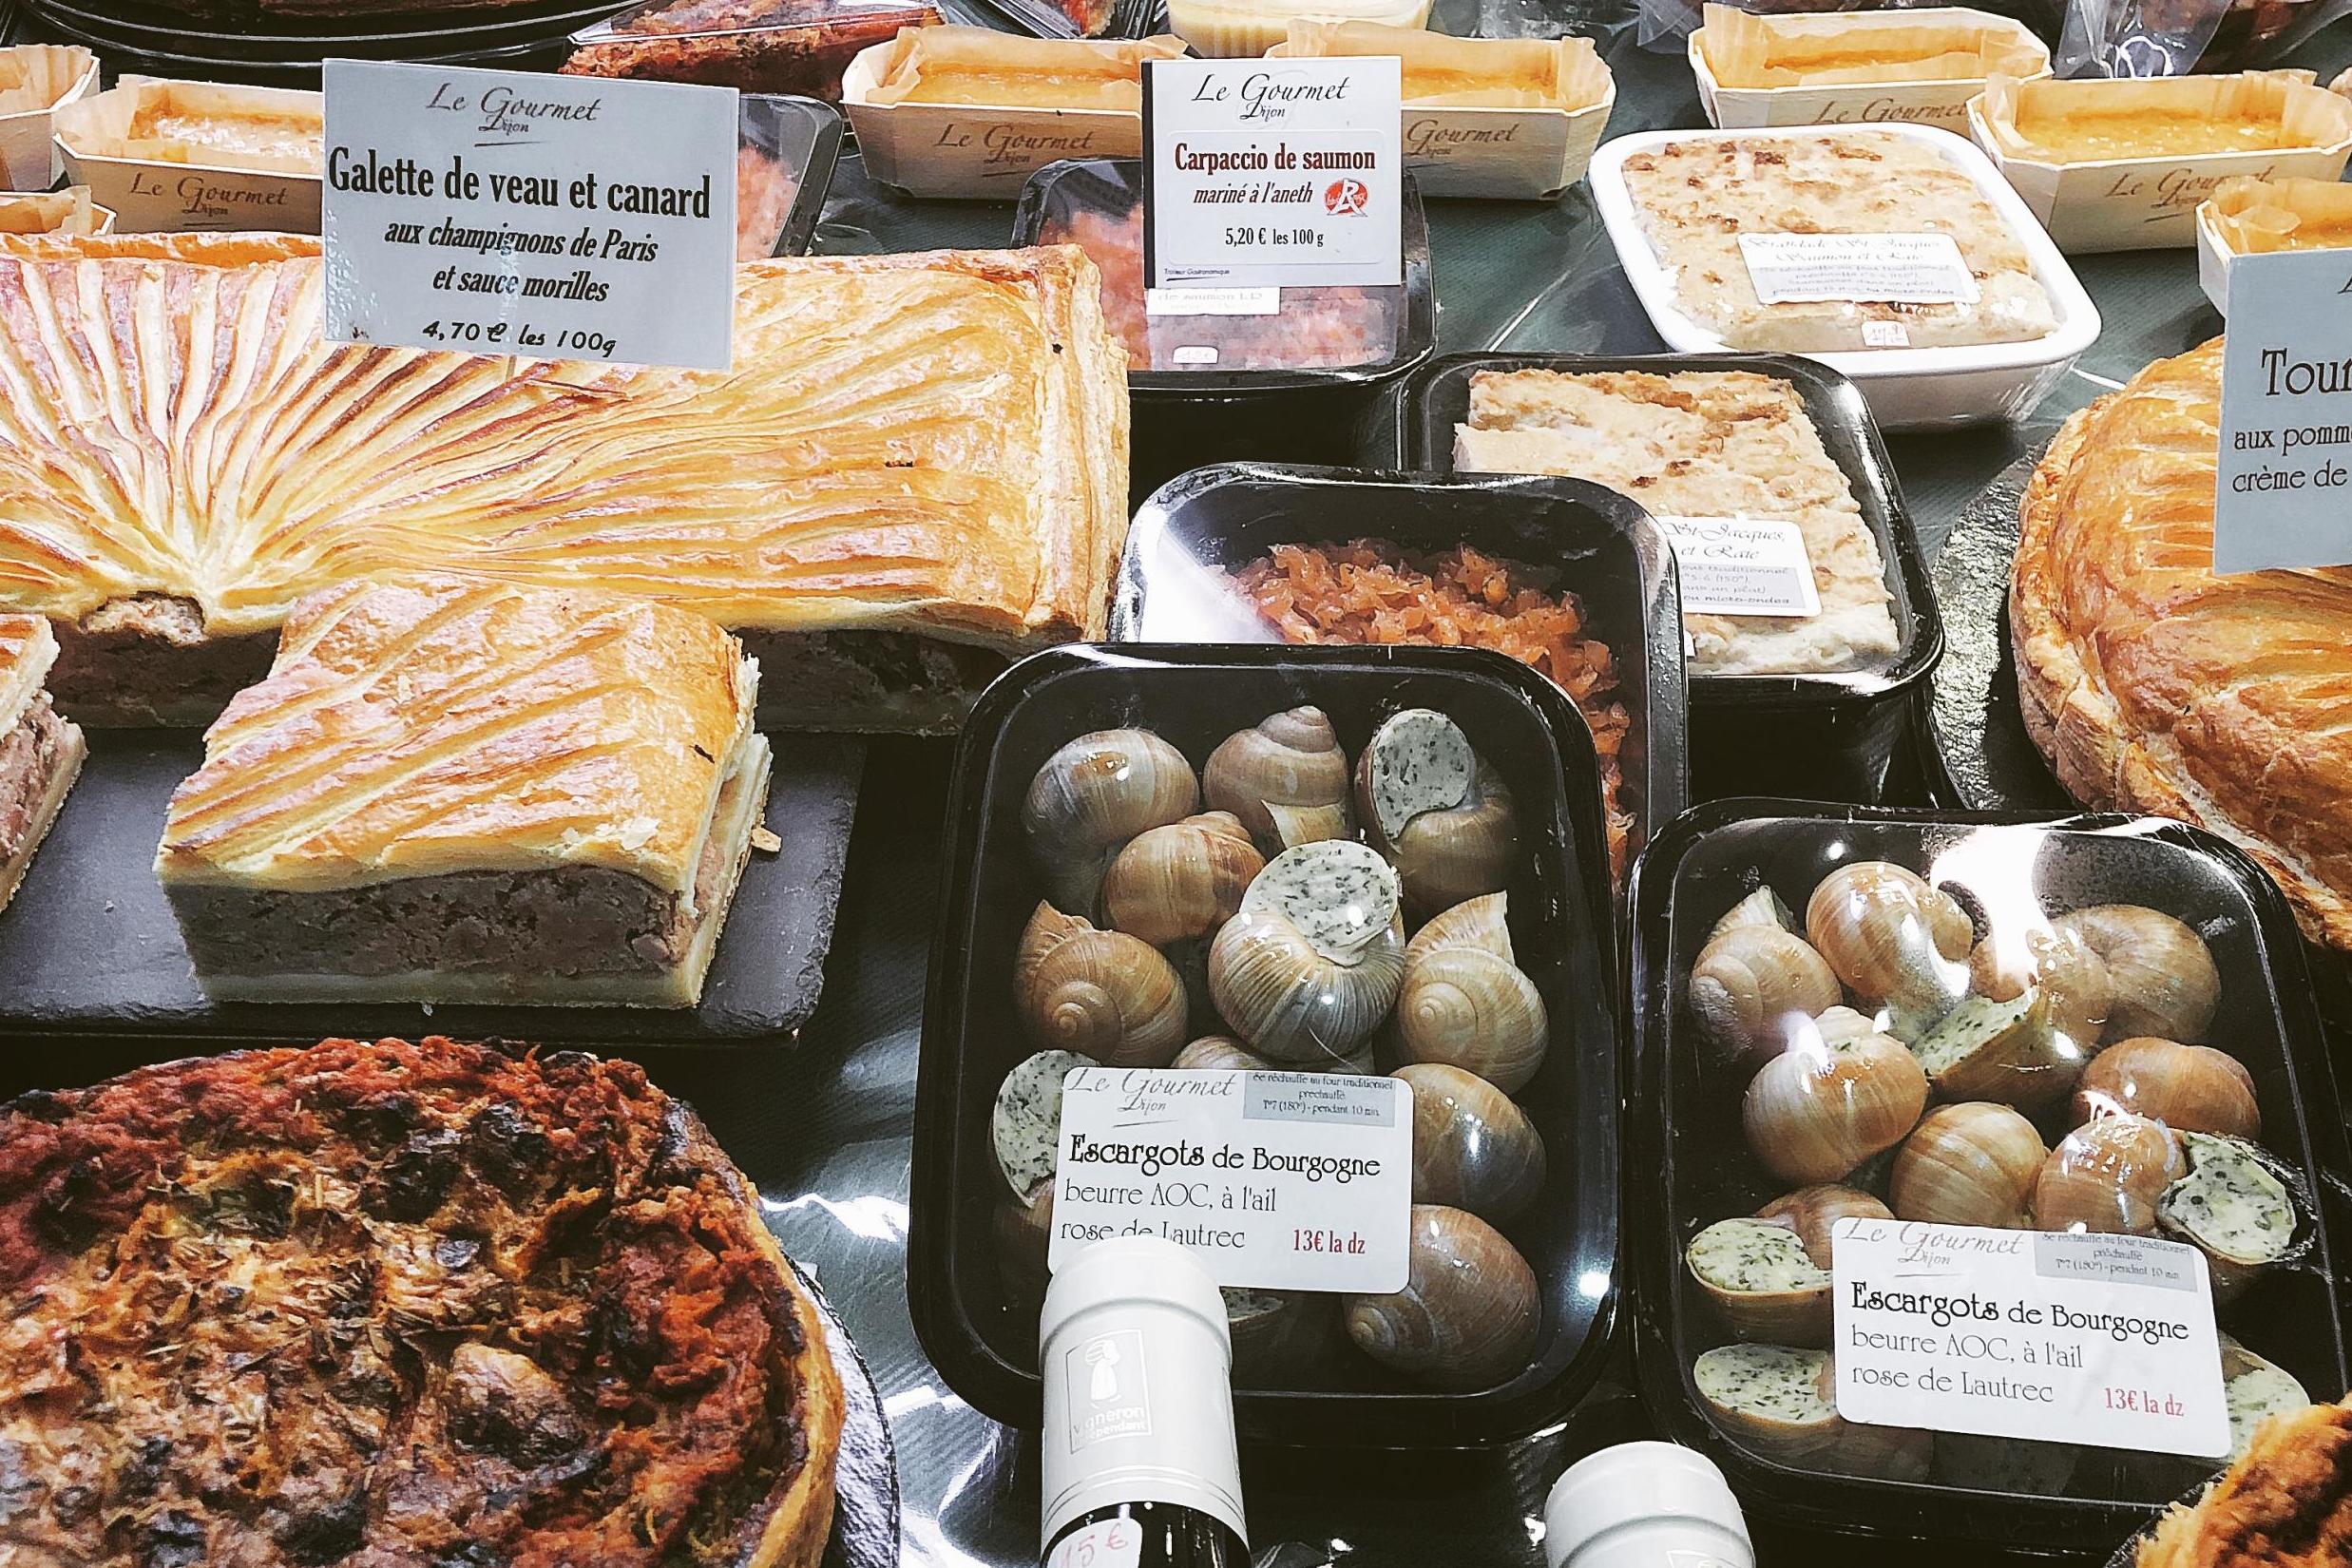 Swing by Le Gourmet at Les Halles for foodie treats